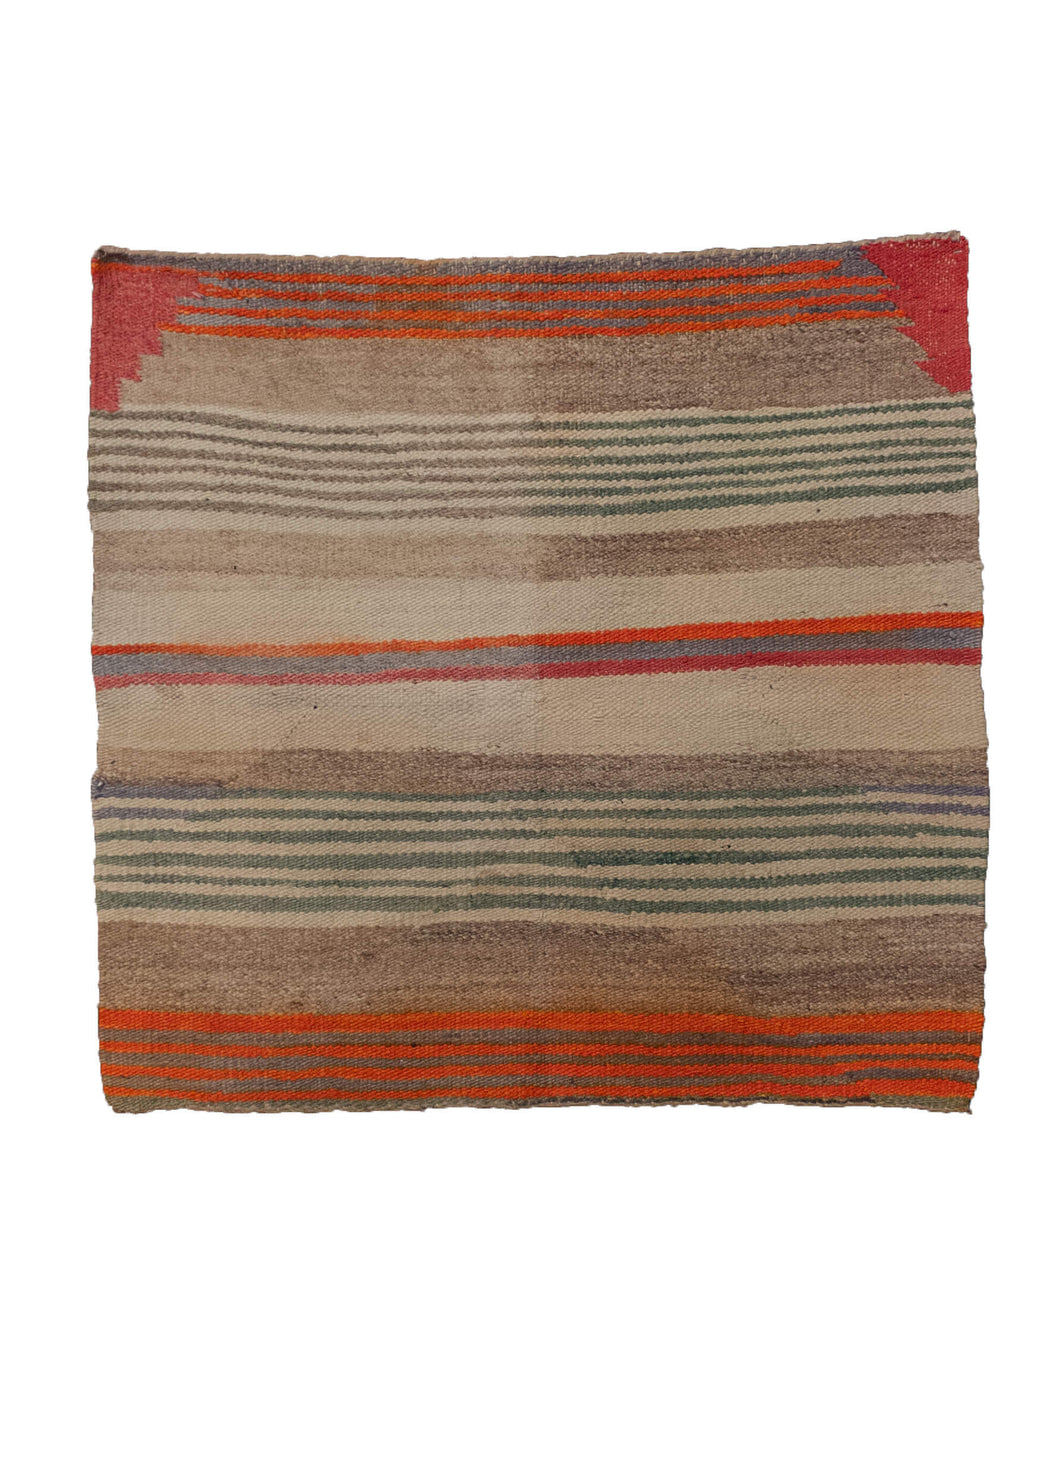 Small vintage Navajo rug from SW USA. Composed of striped horizontal design in bright colors. In fair condition, with some cosmetic issues with color run where the dyes have bled.